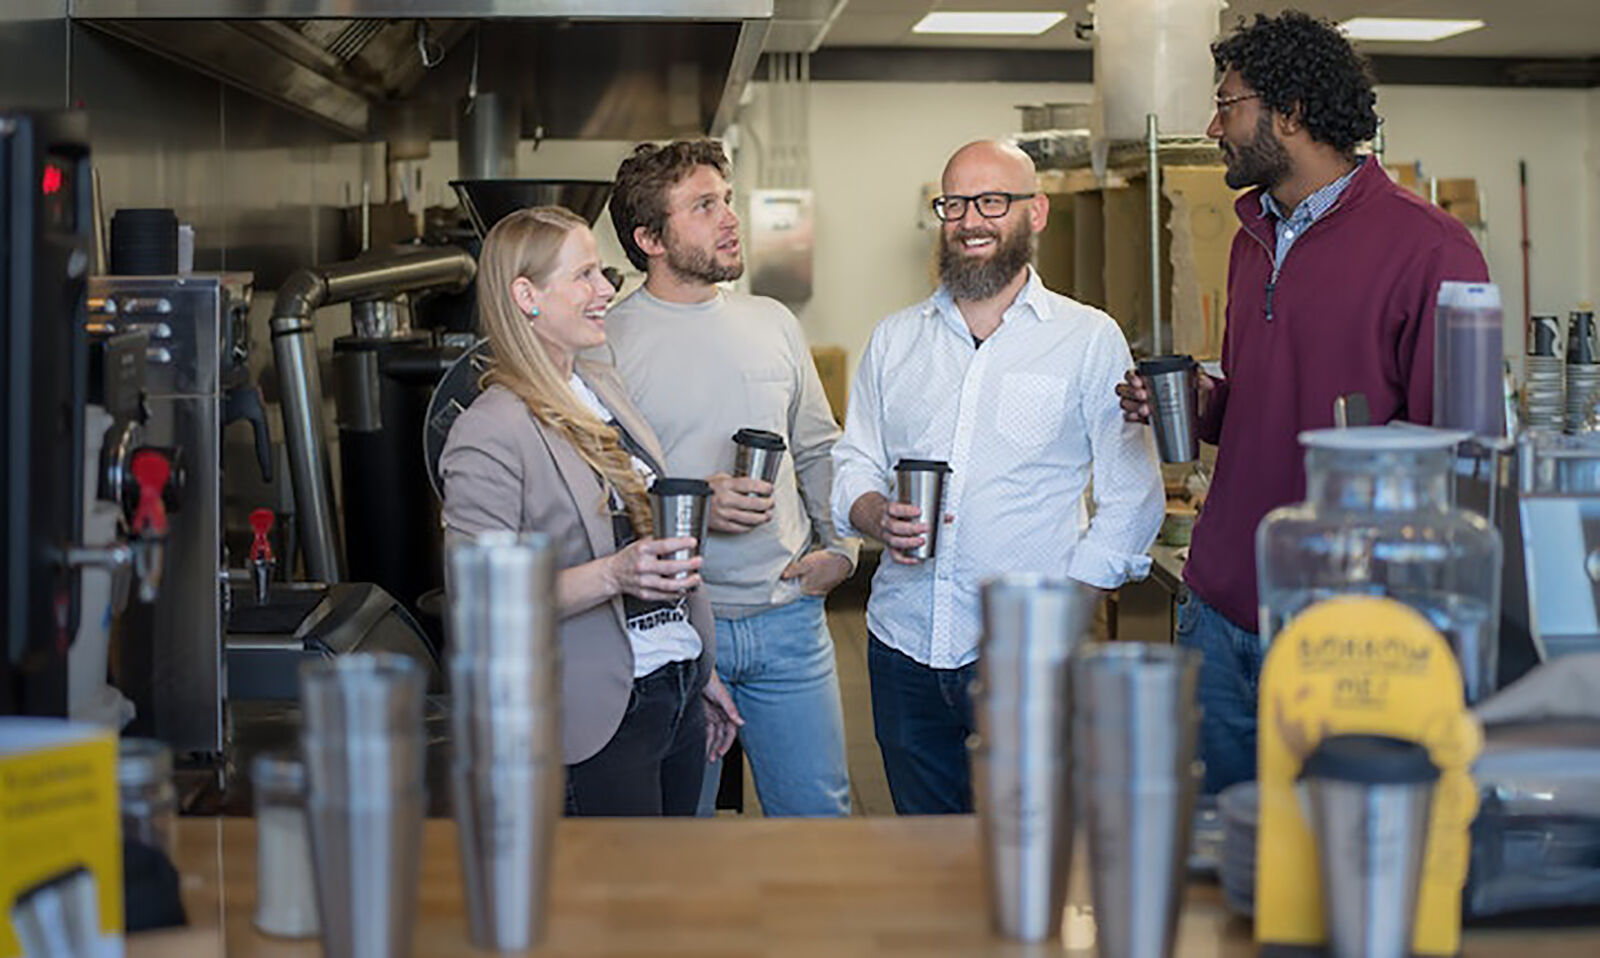 Forever Ware co-founder Natasha Gaffer (from left), Chief Financial Officer Lee Sweatt and co-founders Nick Krumholz and Nolan Singroy gather at Roots Coffee where Singroy is a regular customer and the shop uses their mugs.     PHOTO CREDIT: Tribune News Service